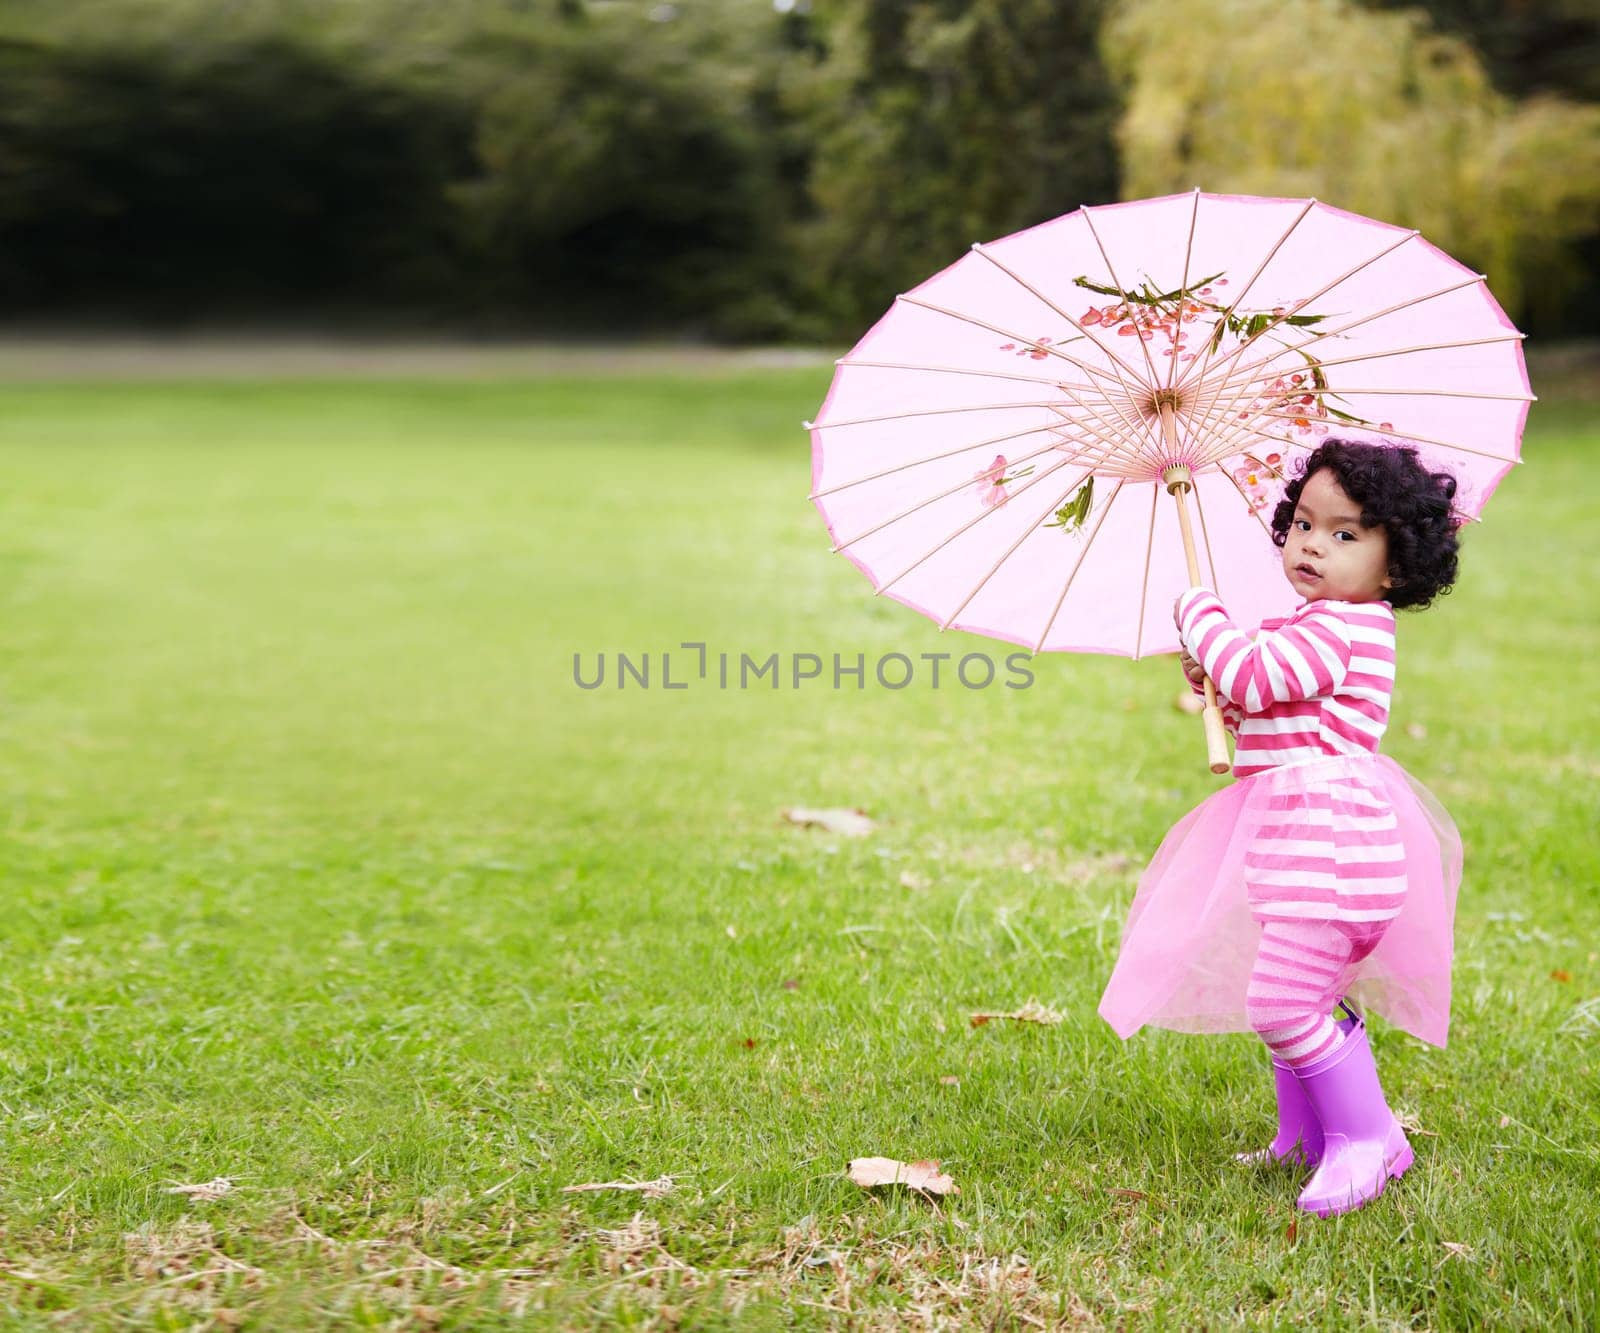 Umbrella, walking and girl child in a garden walking on the grass on summer weekend. Adorable, playful and young kid, baby or toddler with curly hair playing on the lawn in outdoor field or park. by YuriArcurs